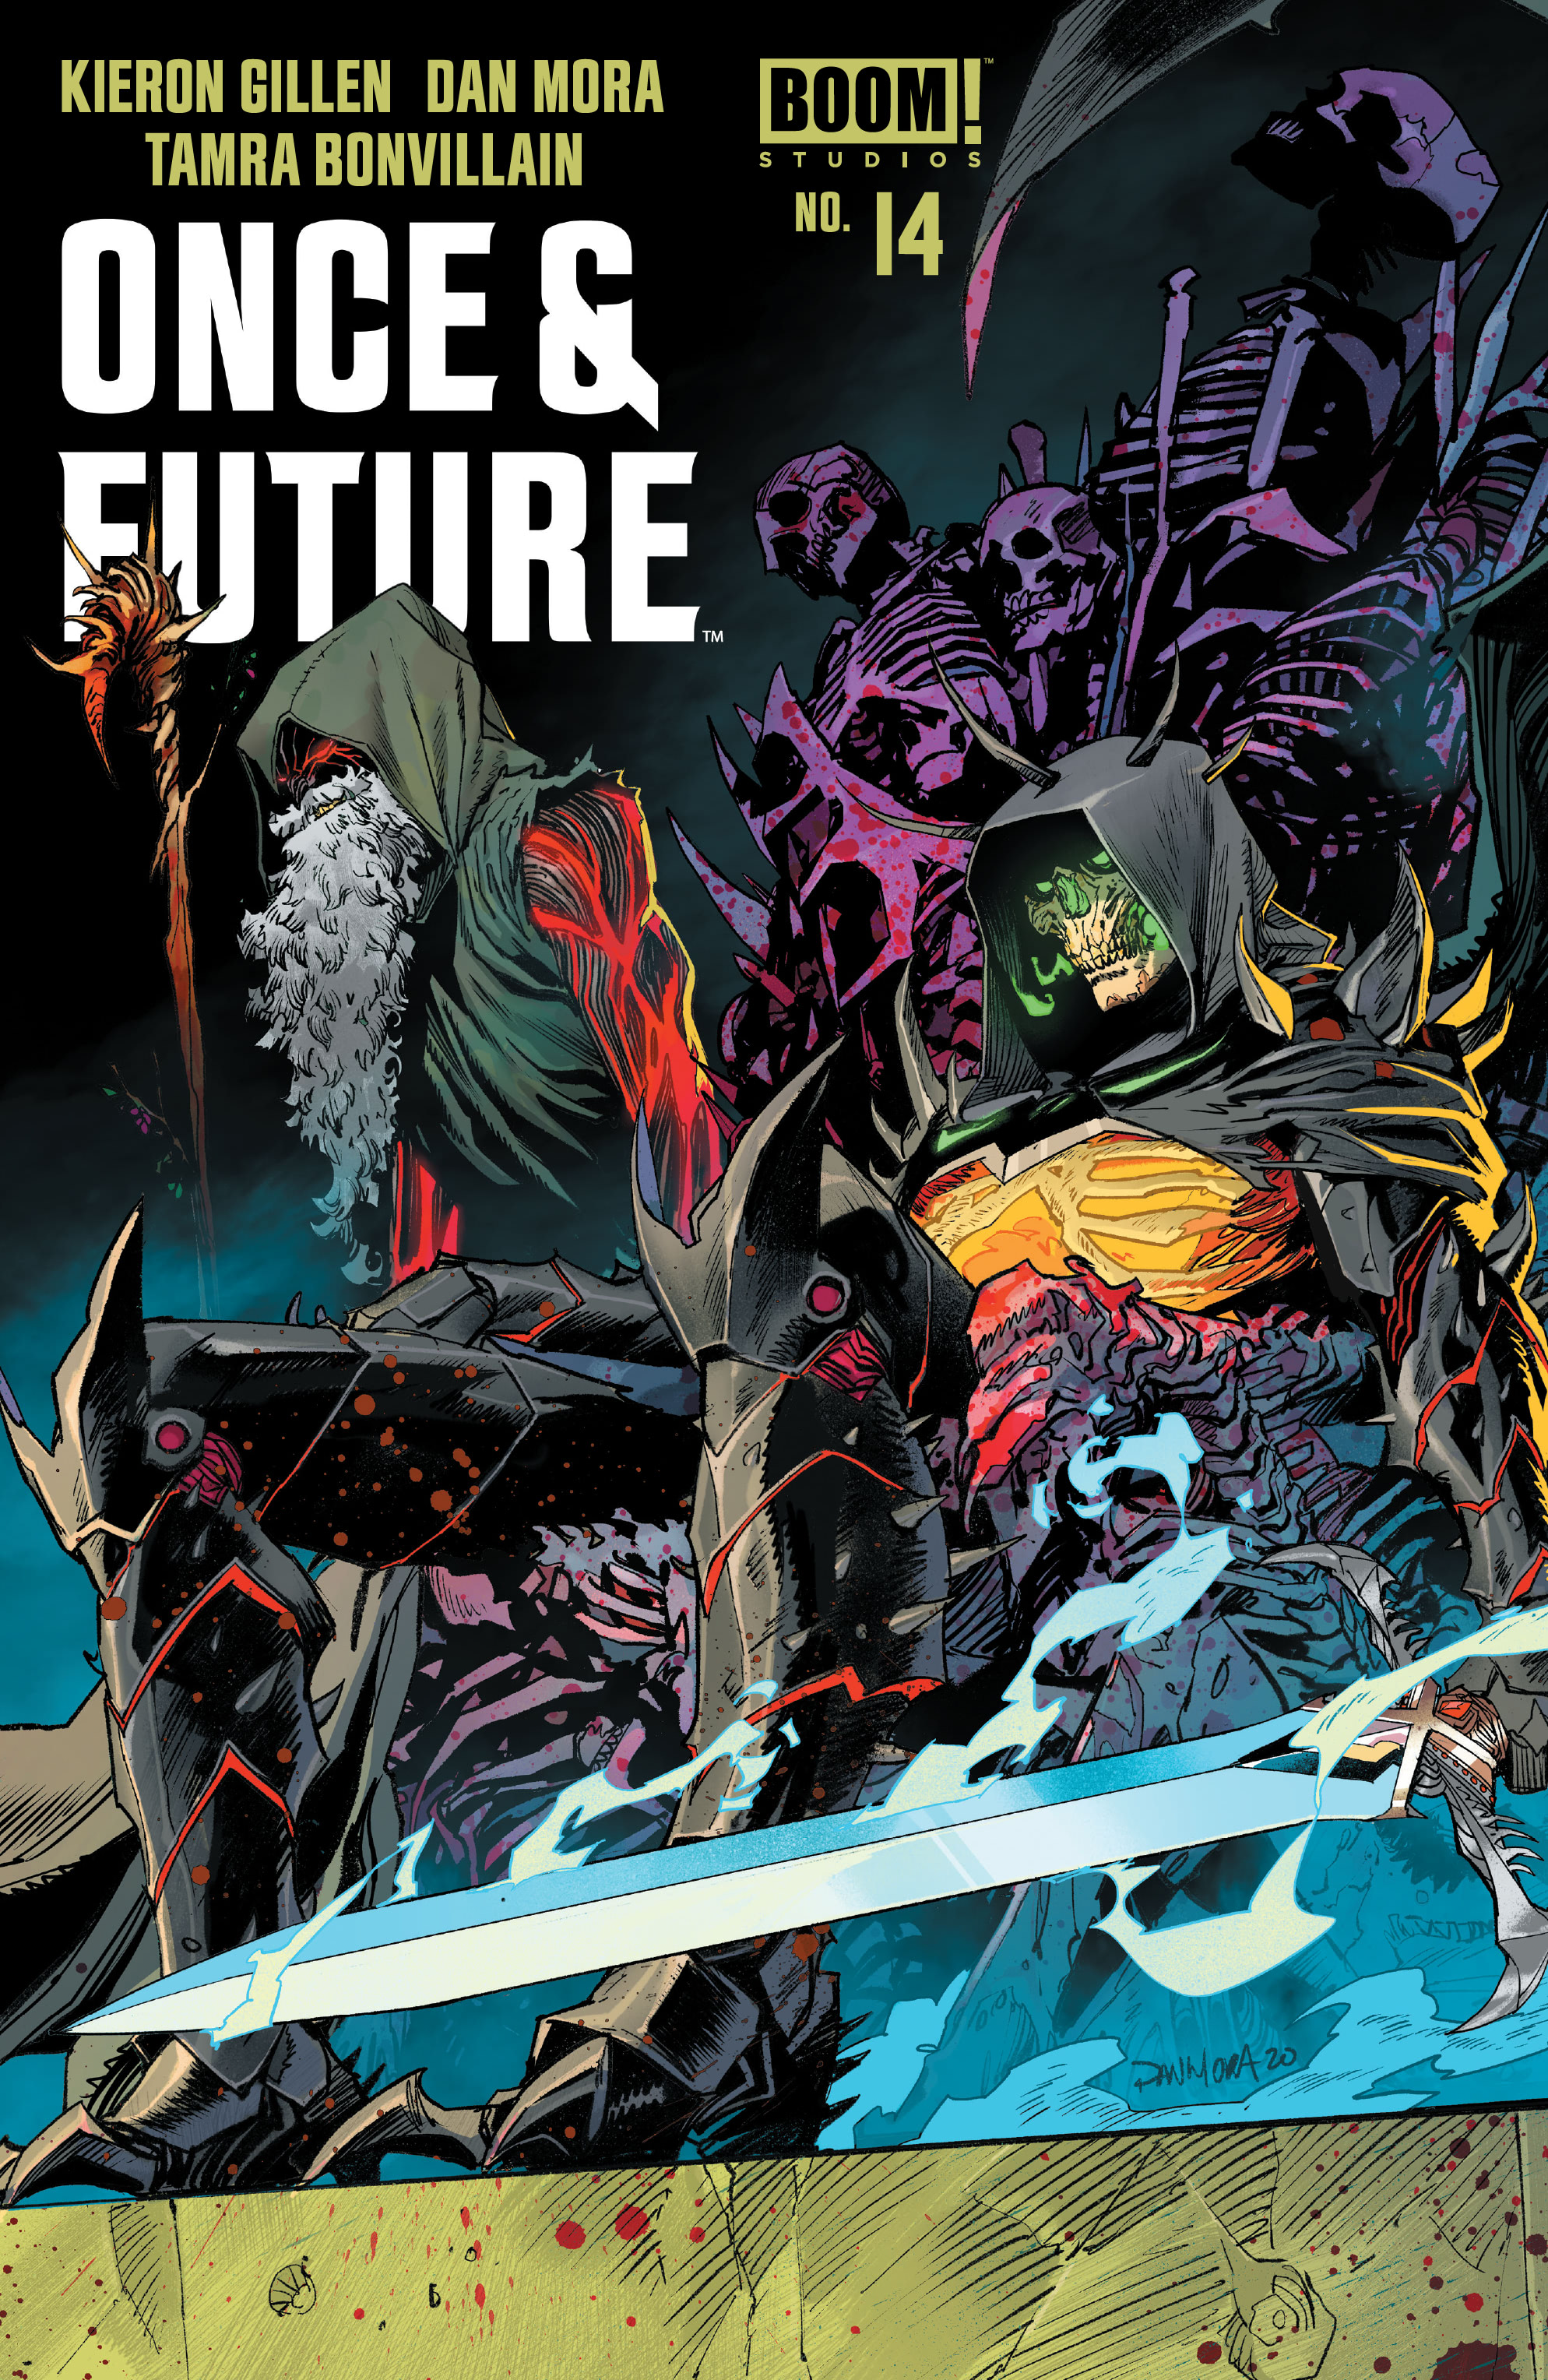 Read online Once & Future comic -  Issue #14 - 1